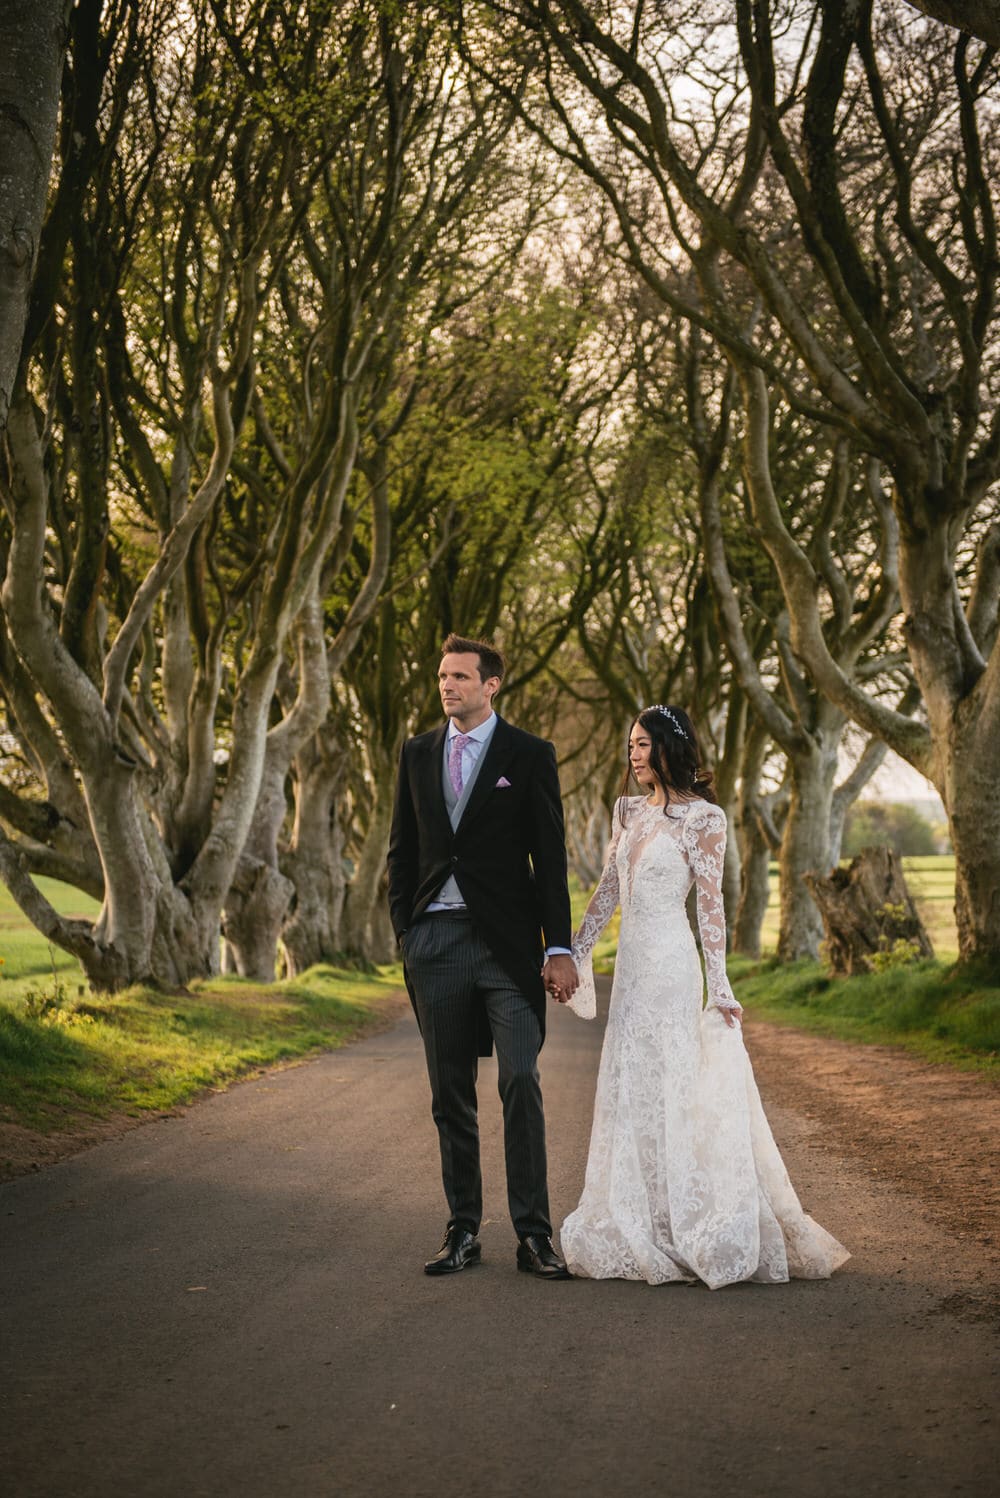 Dreamy shot of the couple walking along a picturesque pathway amidst lush greenery during their Northern Ireland elopement.